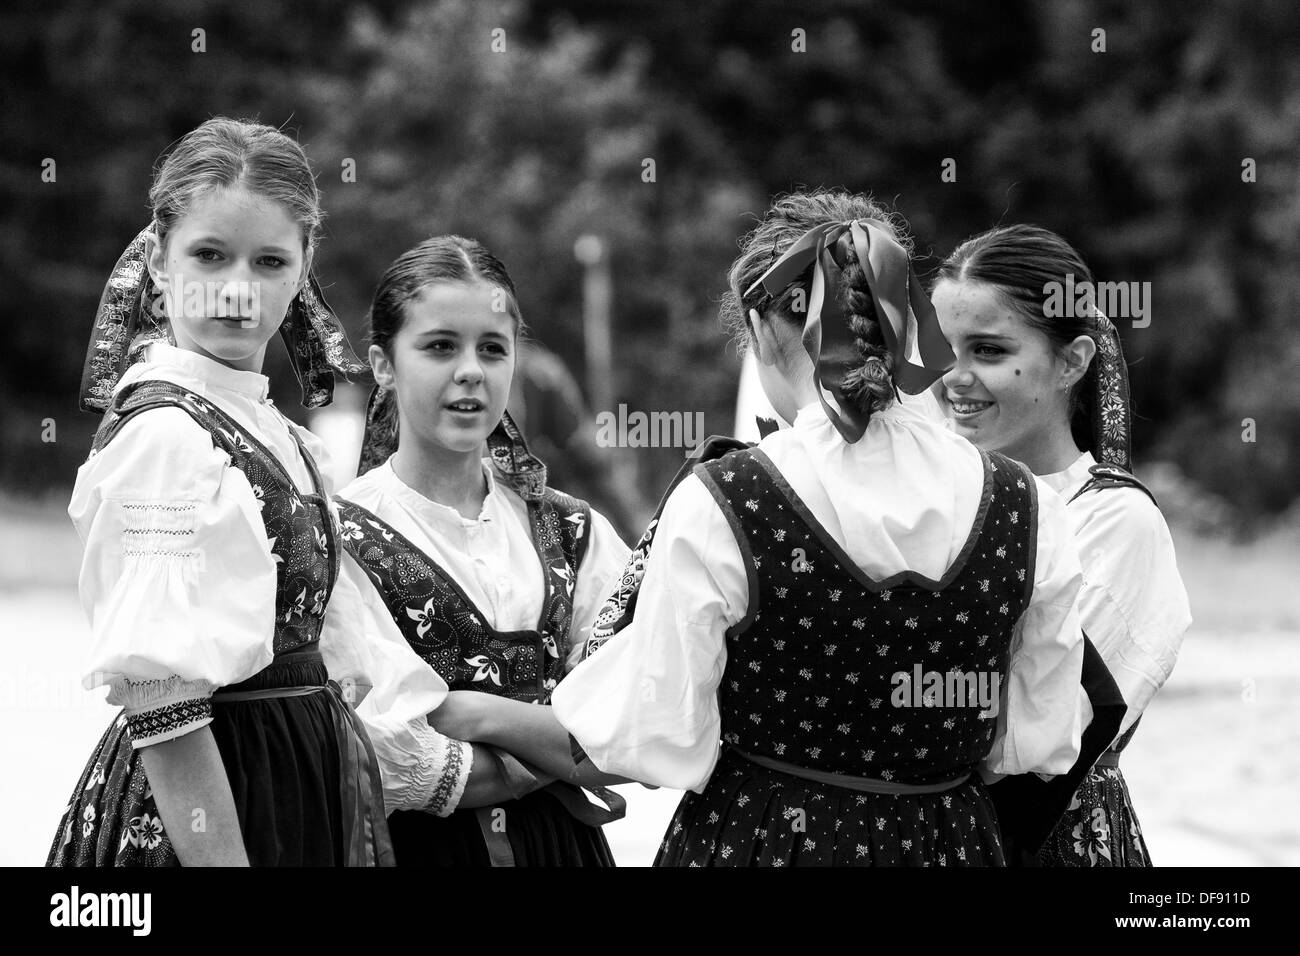 Girls in folklore costume before dancing performance Stock Photo